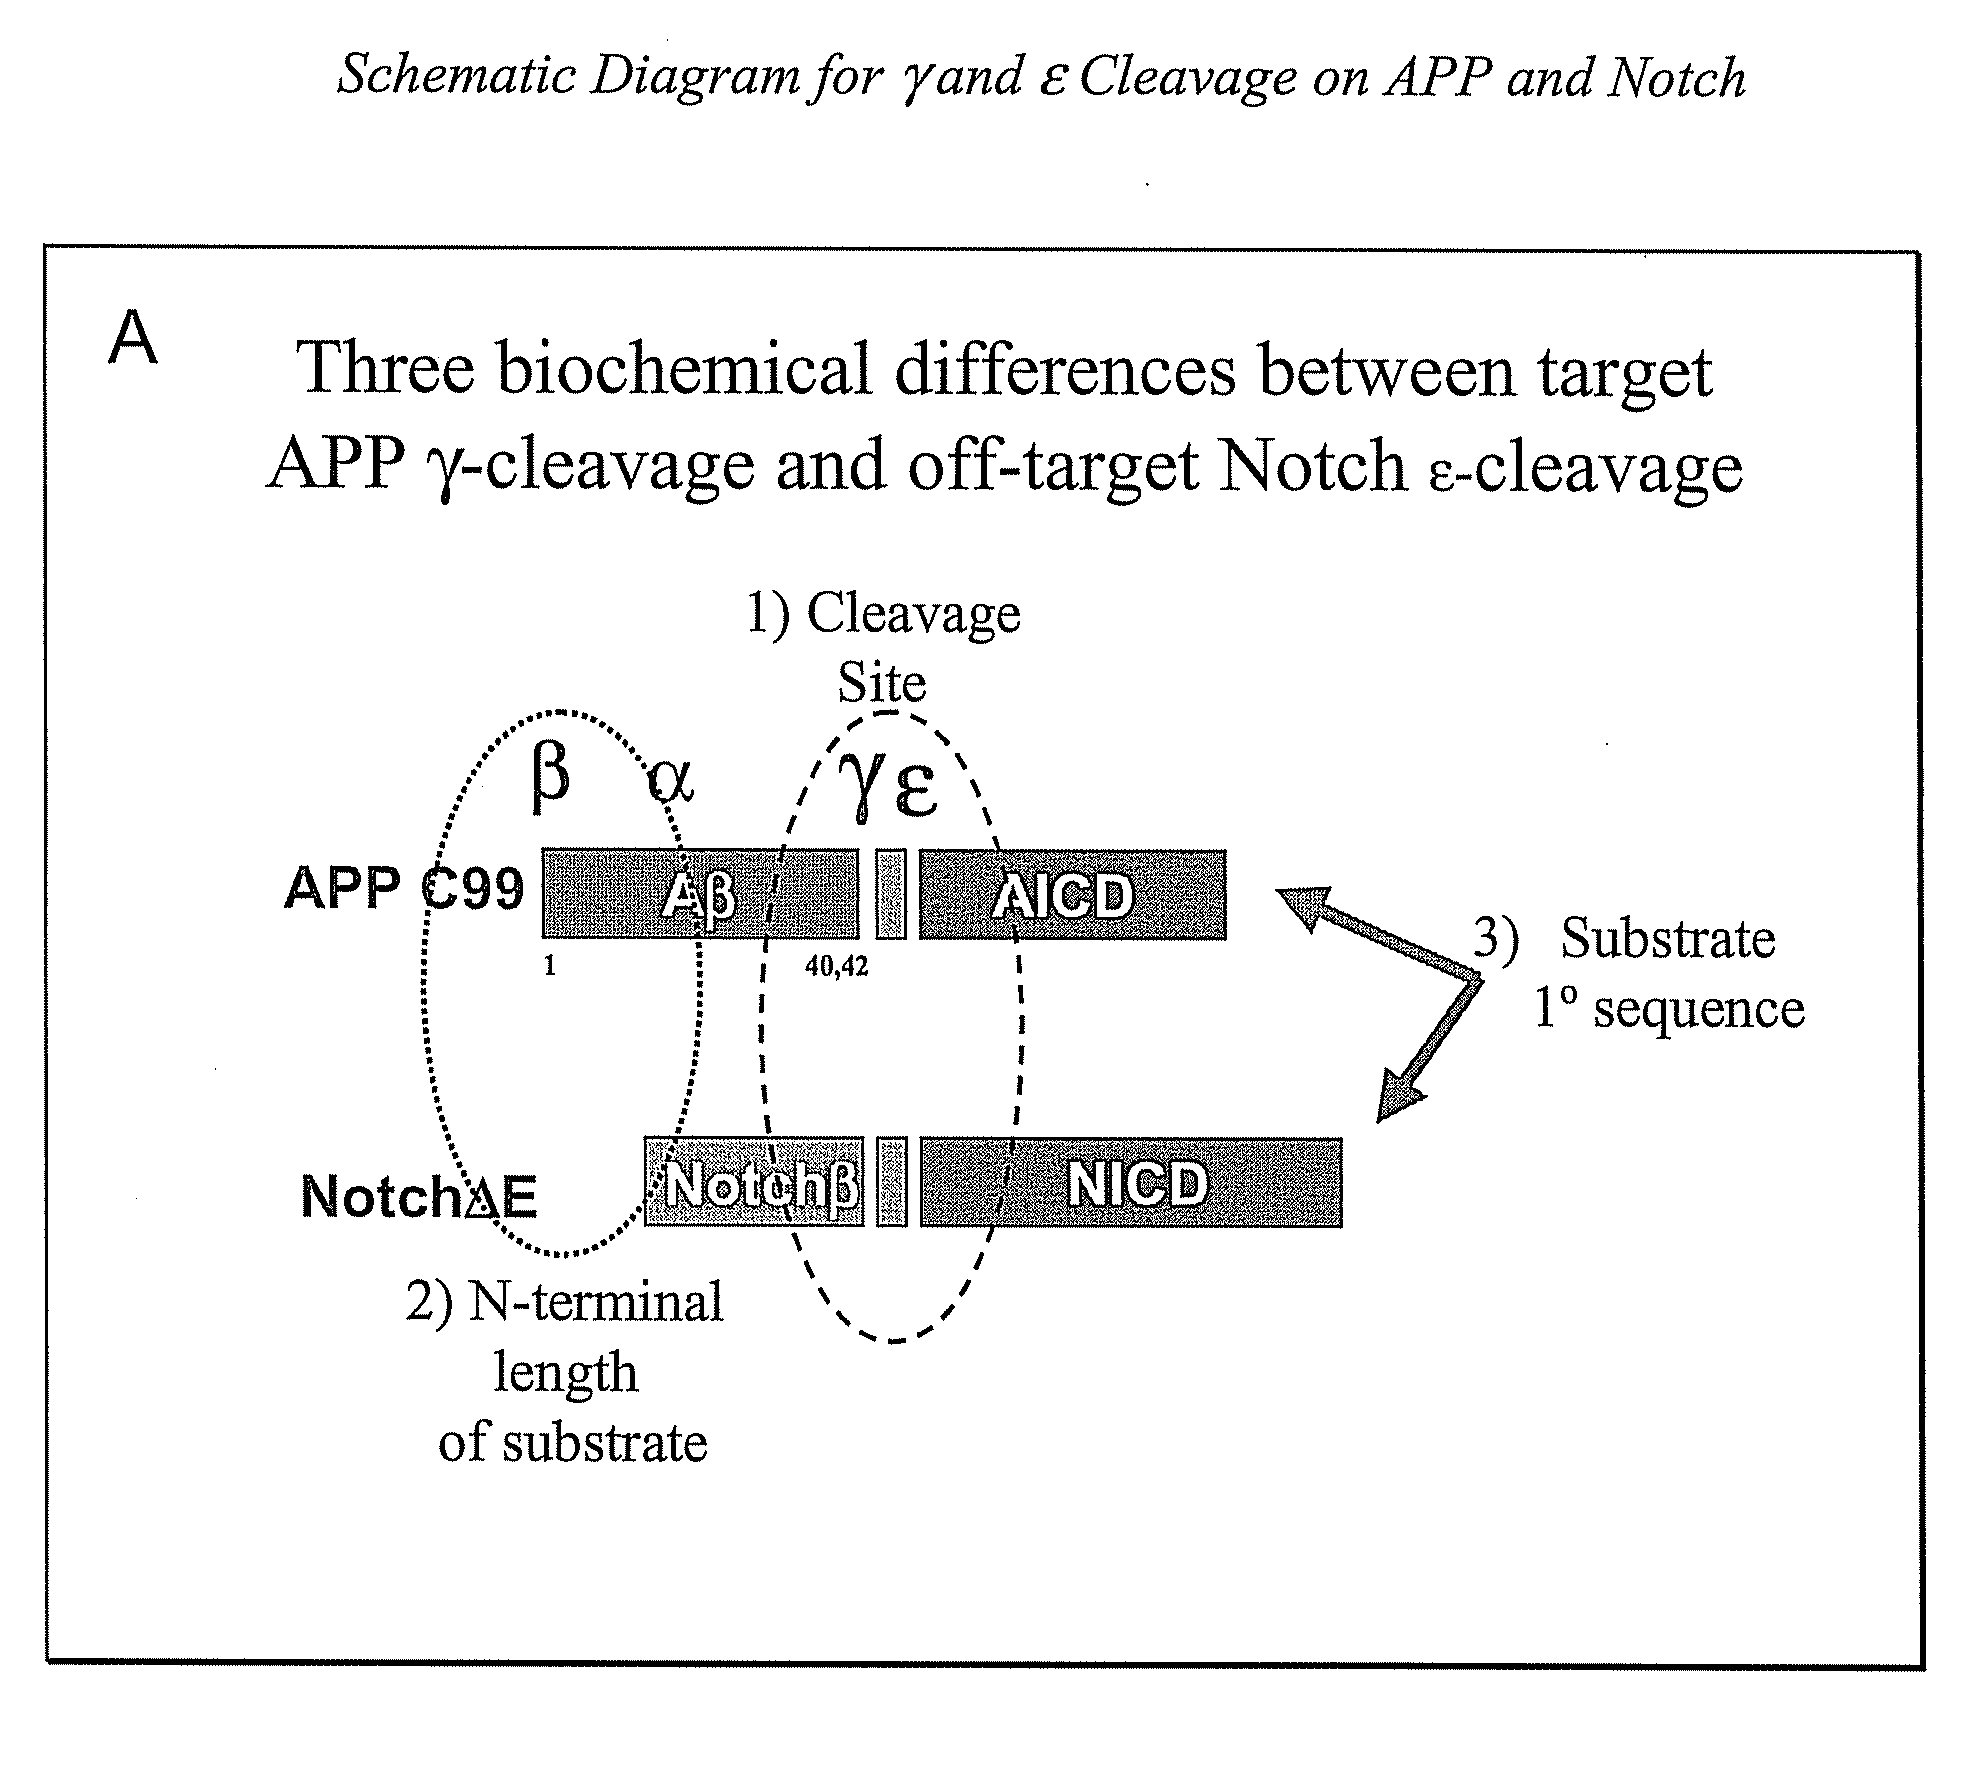 Triple Assay System for Identifying Substrate Selectivity of Gamma Secretase Inhibitors